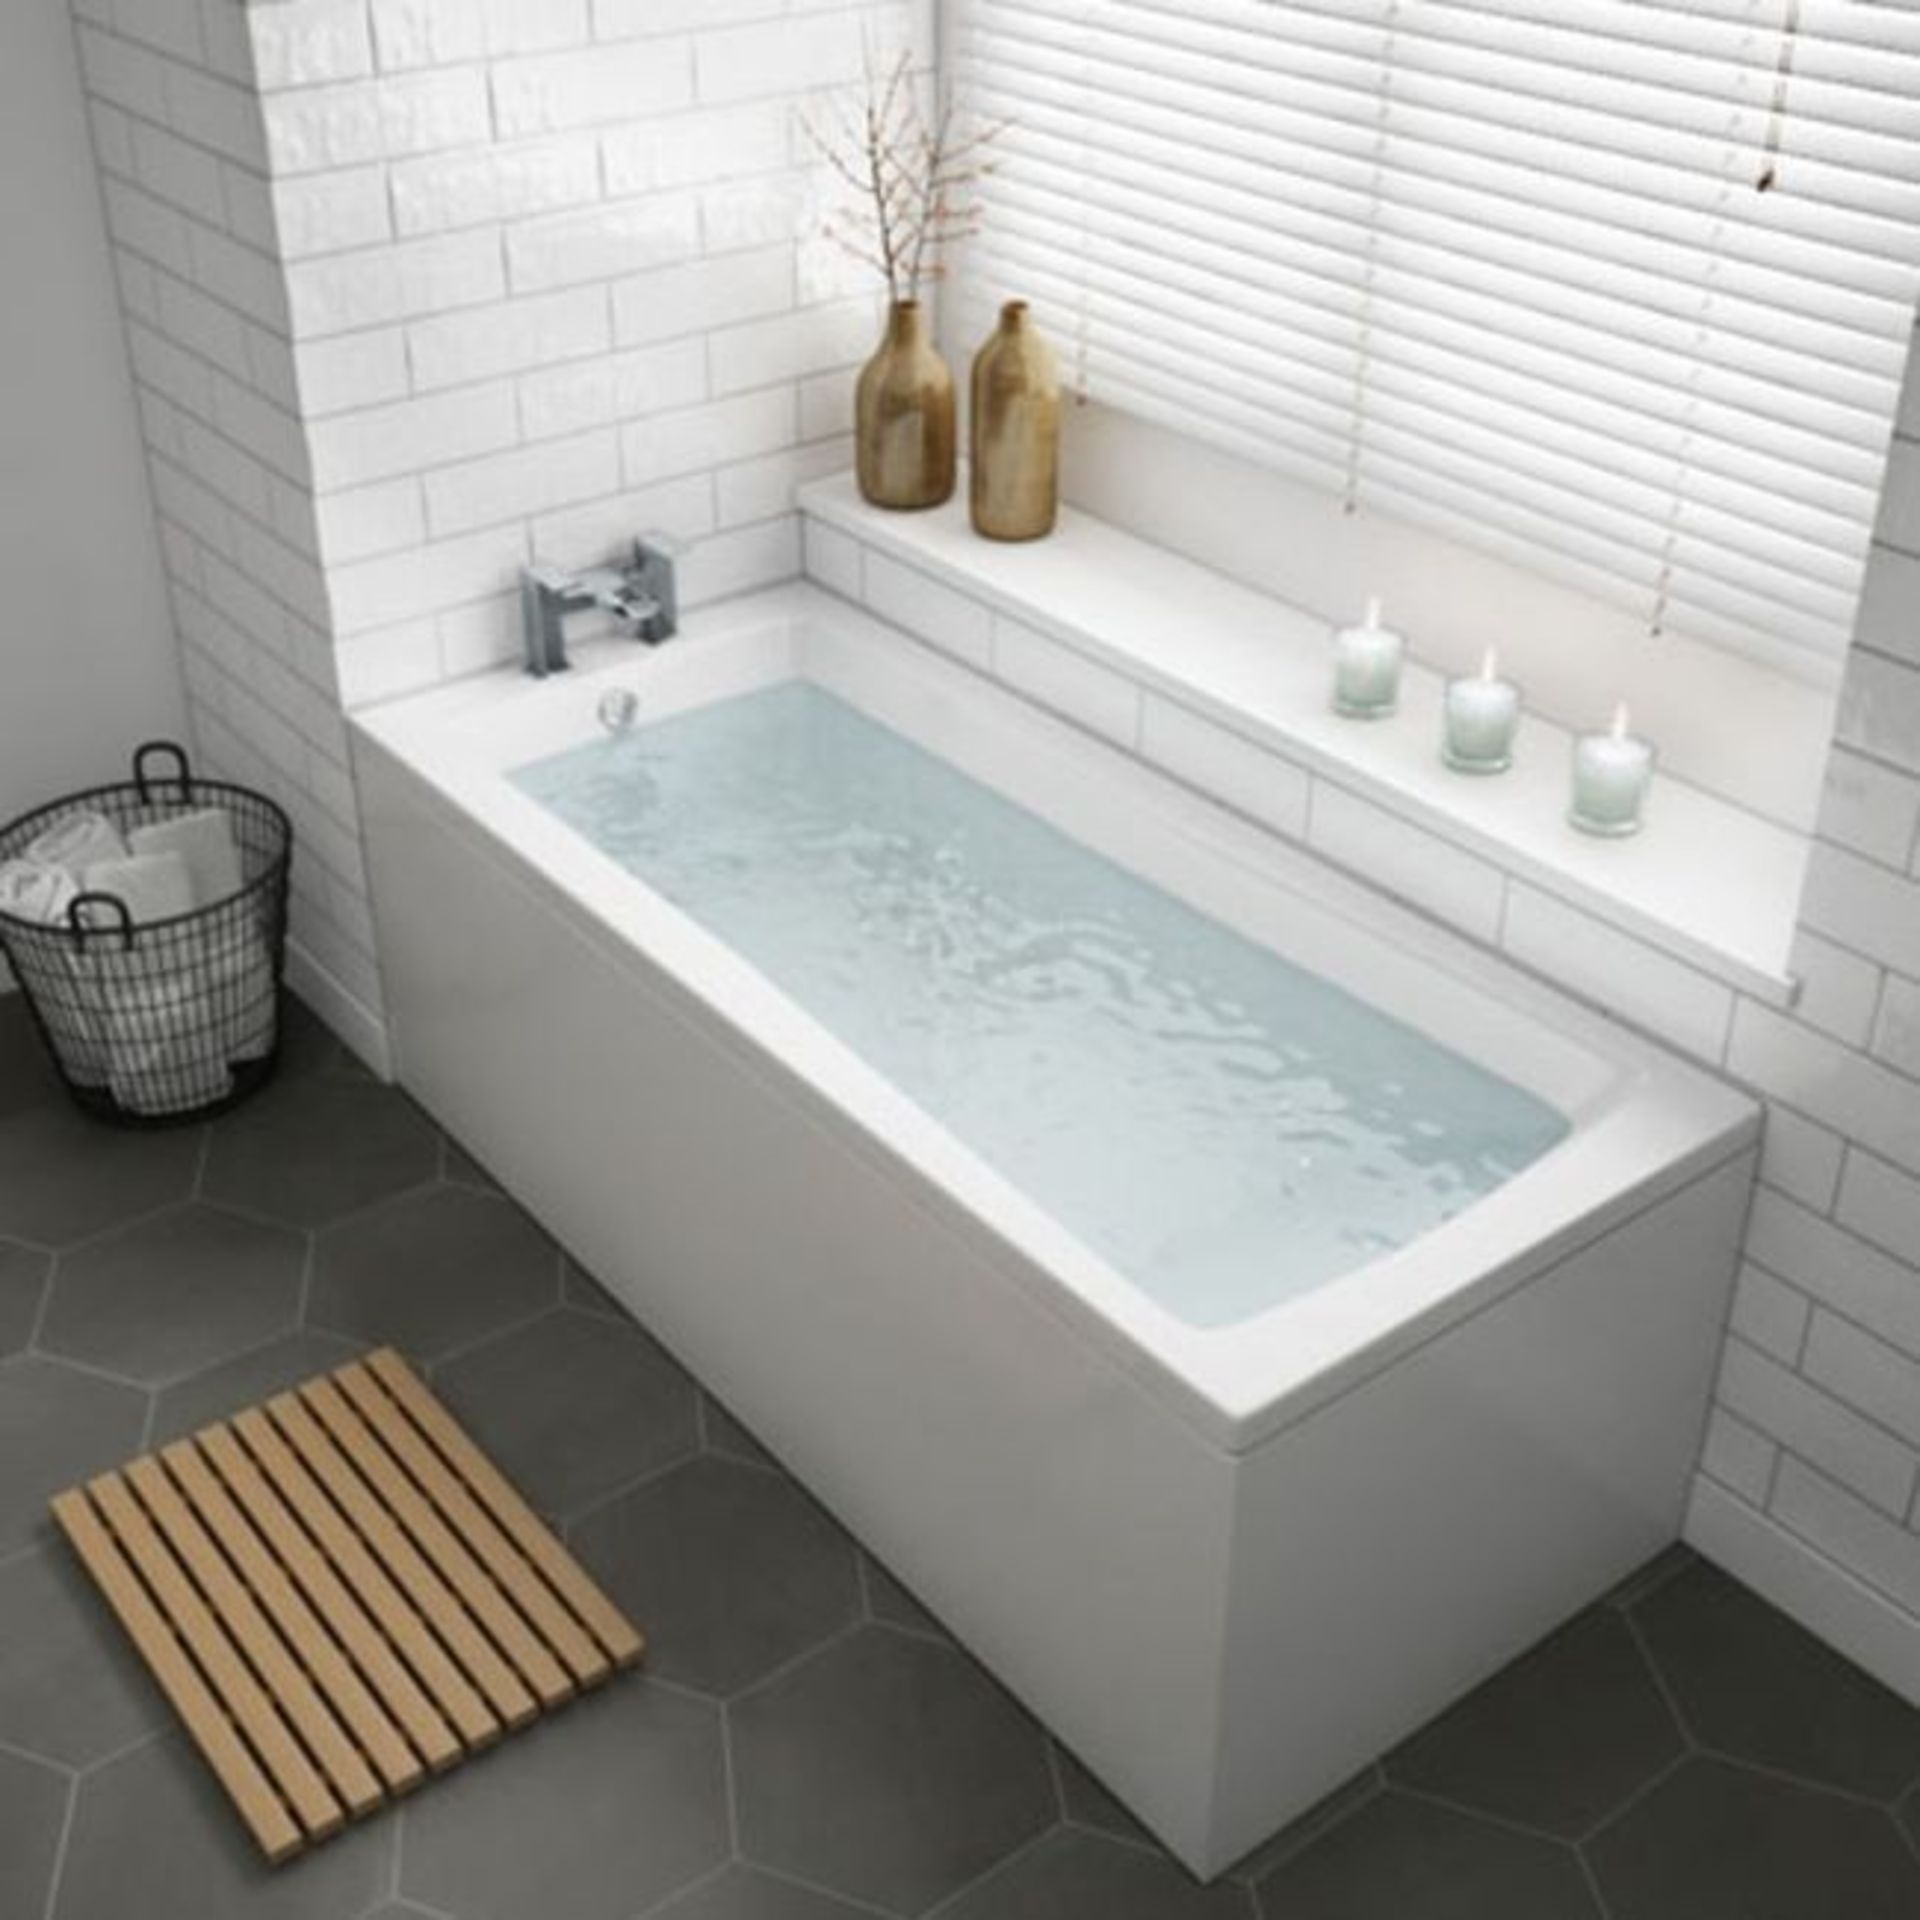 NEW 1700x700x545mm Whirlpool Jacuzzi Single Ended Bath - 6 Jets. RRP £1,299.99.Spa Experience... - Image 2 of 3